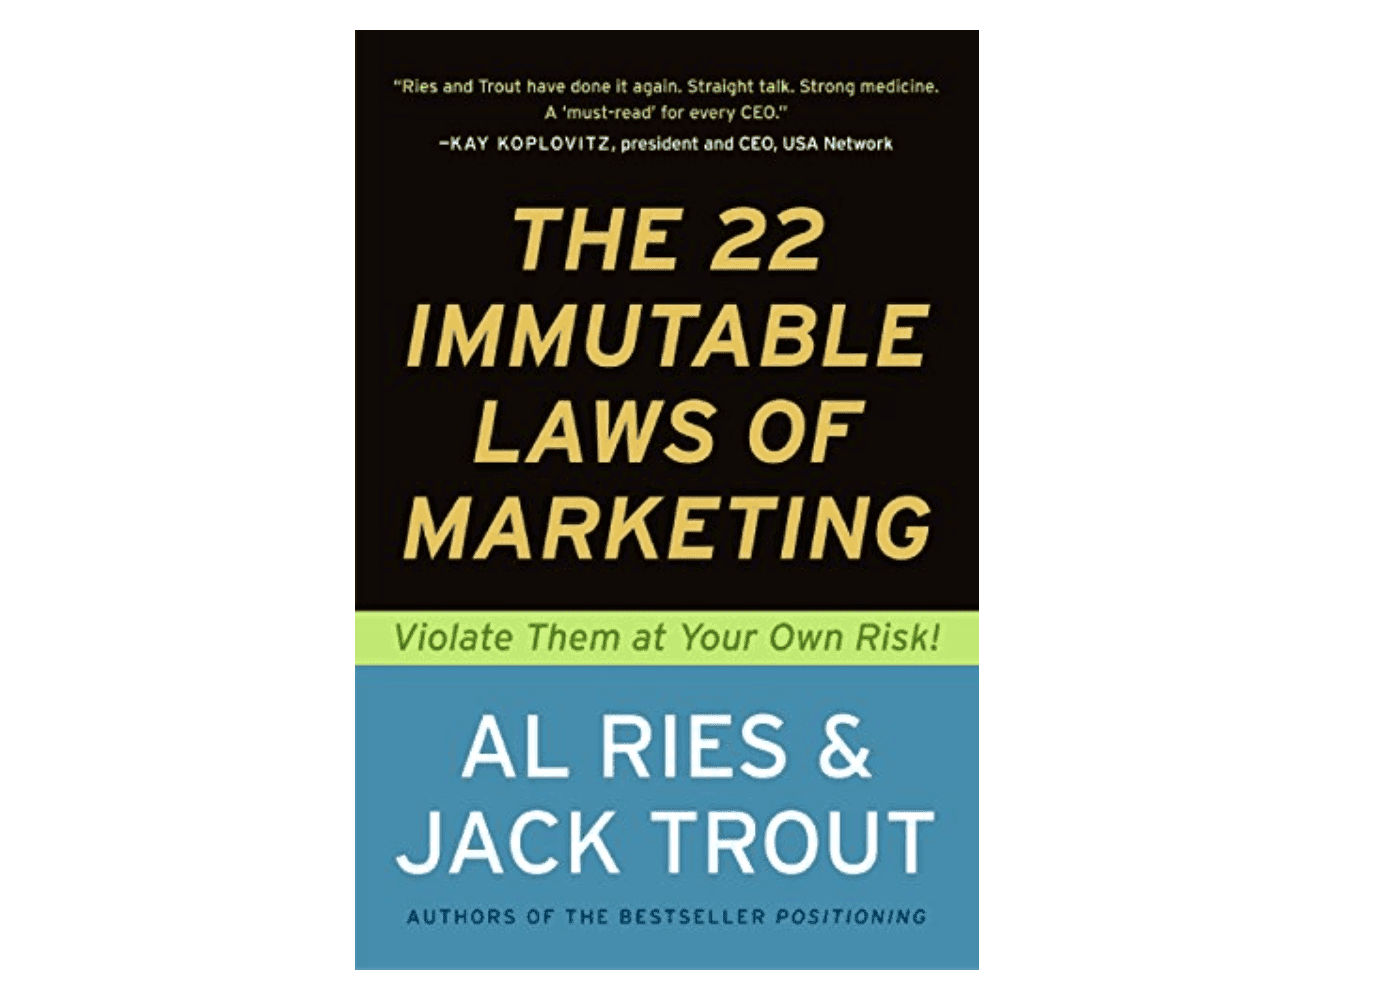 screenshot of the 22 immutable laws of marketing book cover